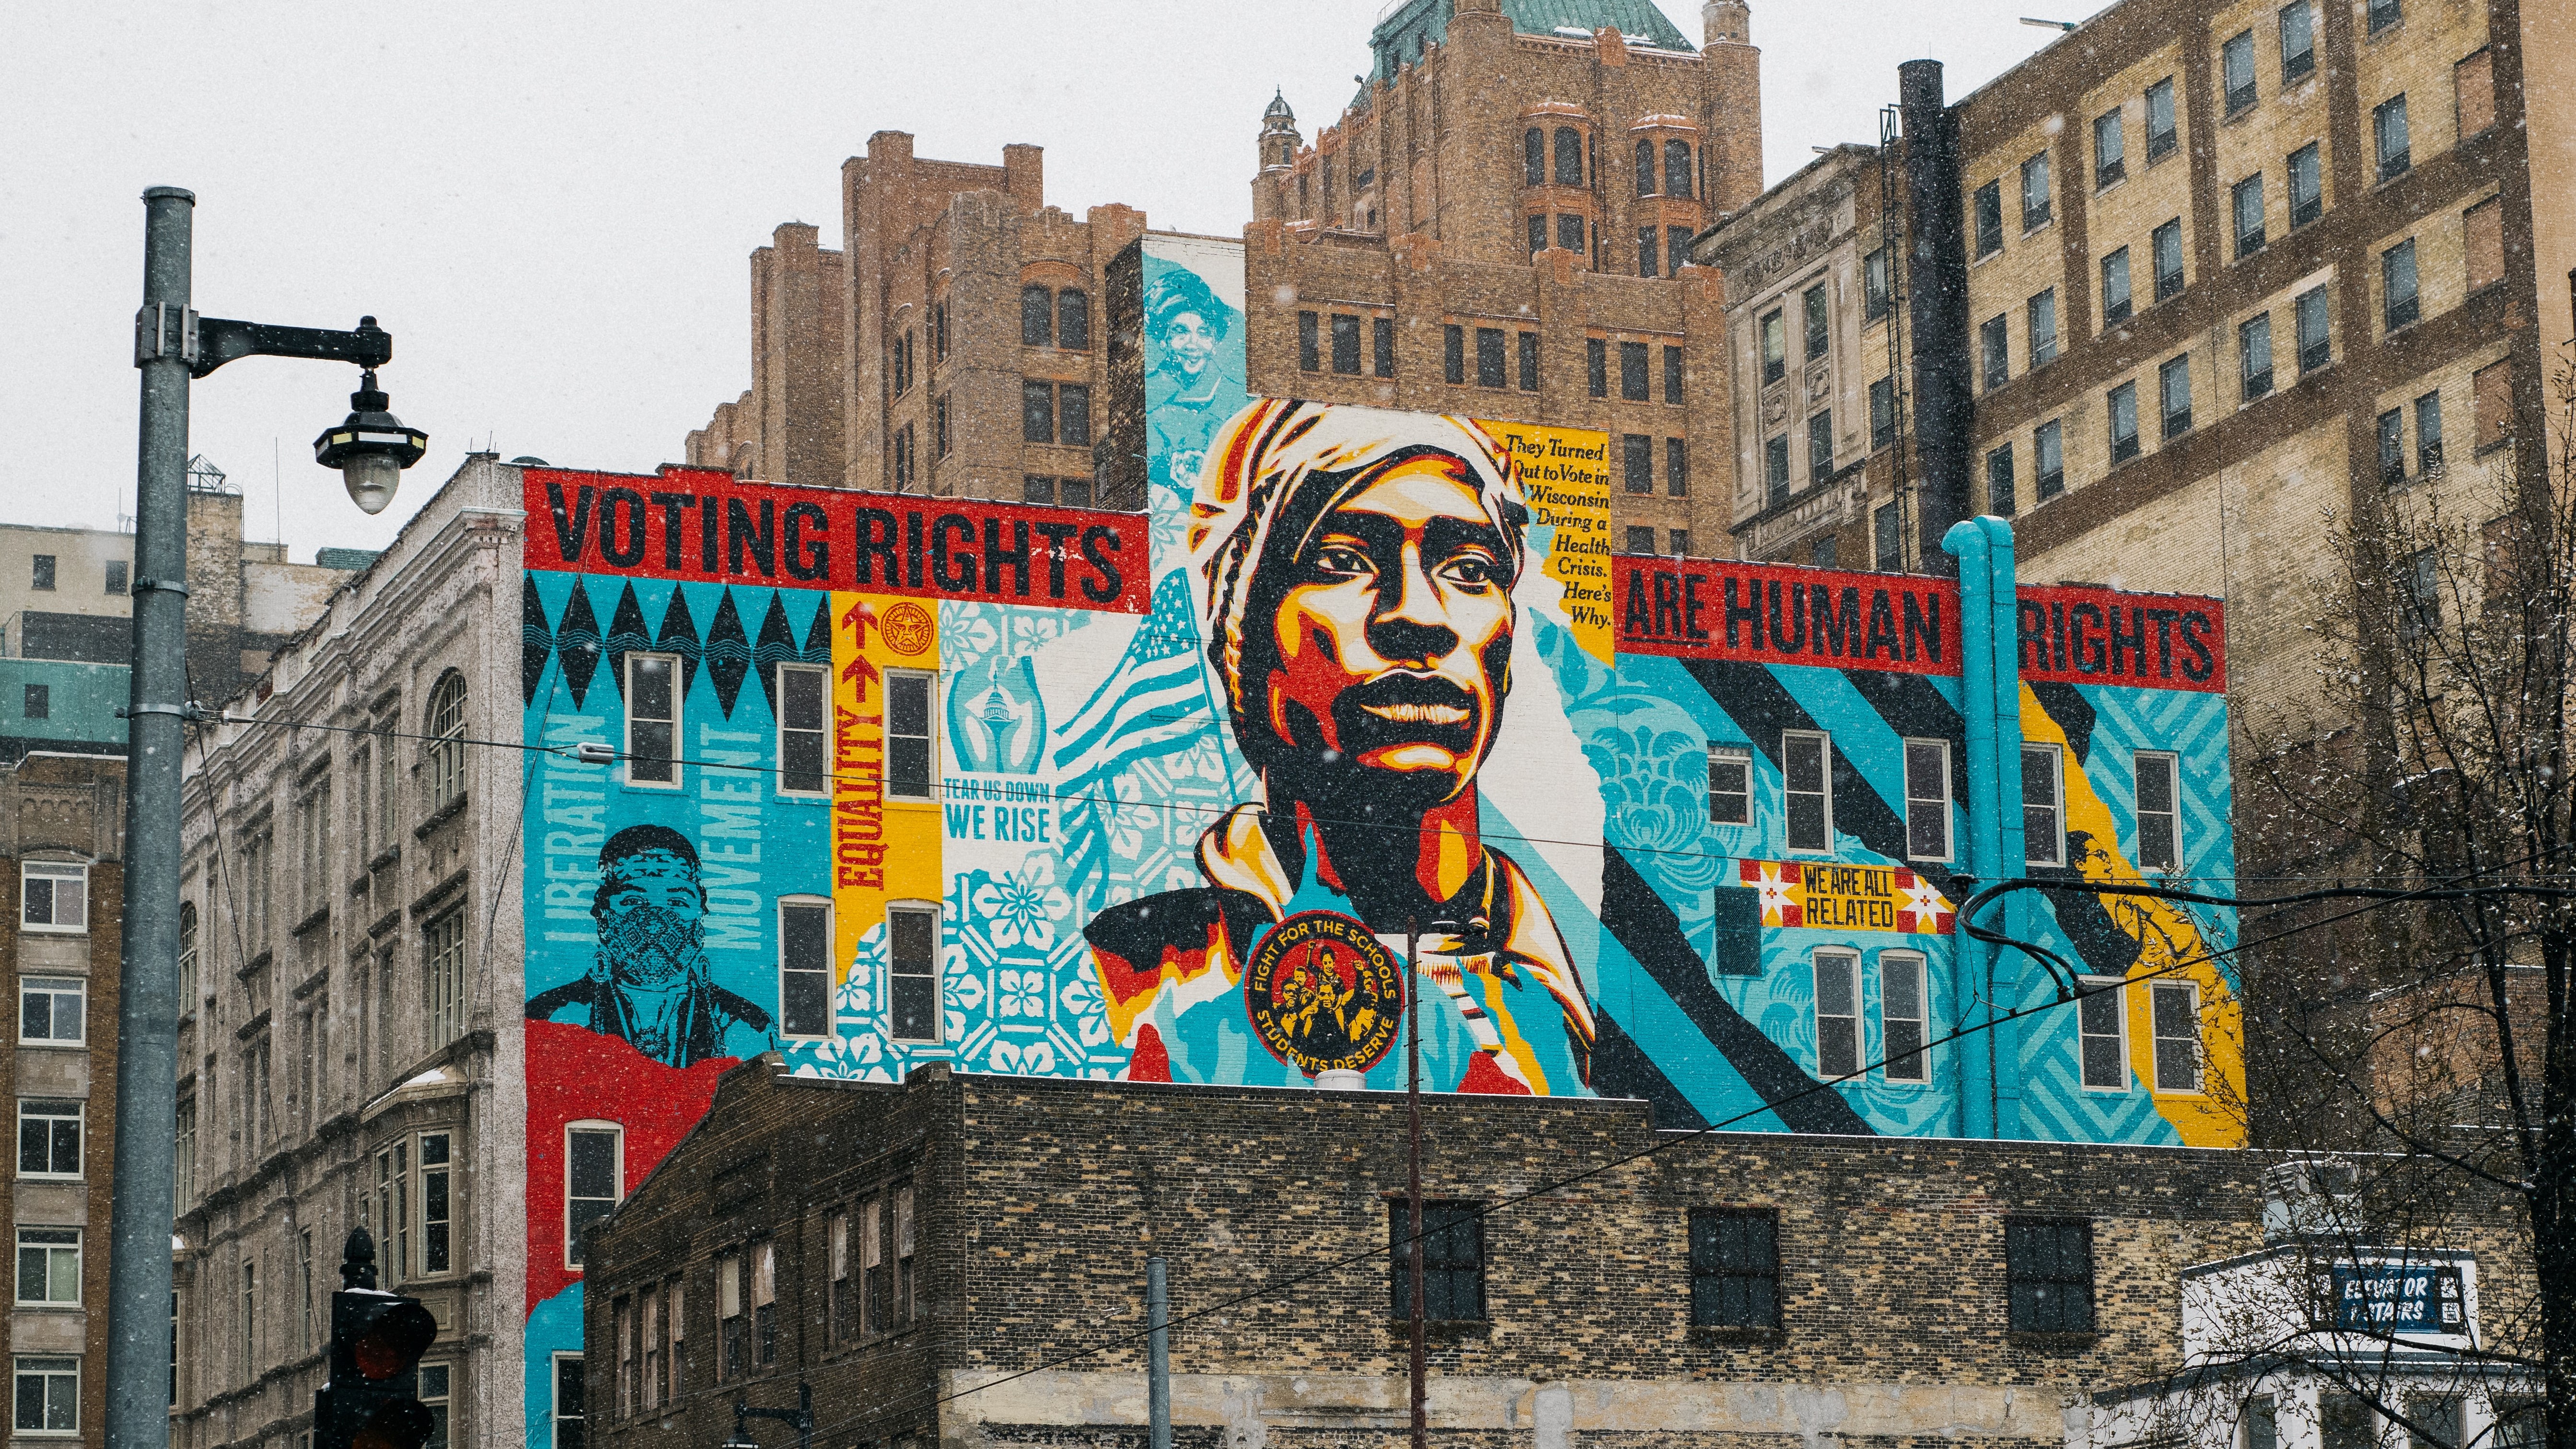 Voting rights are human rights wall mural